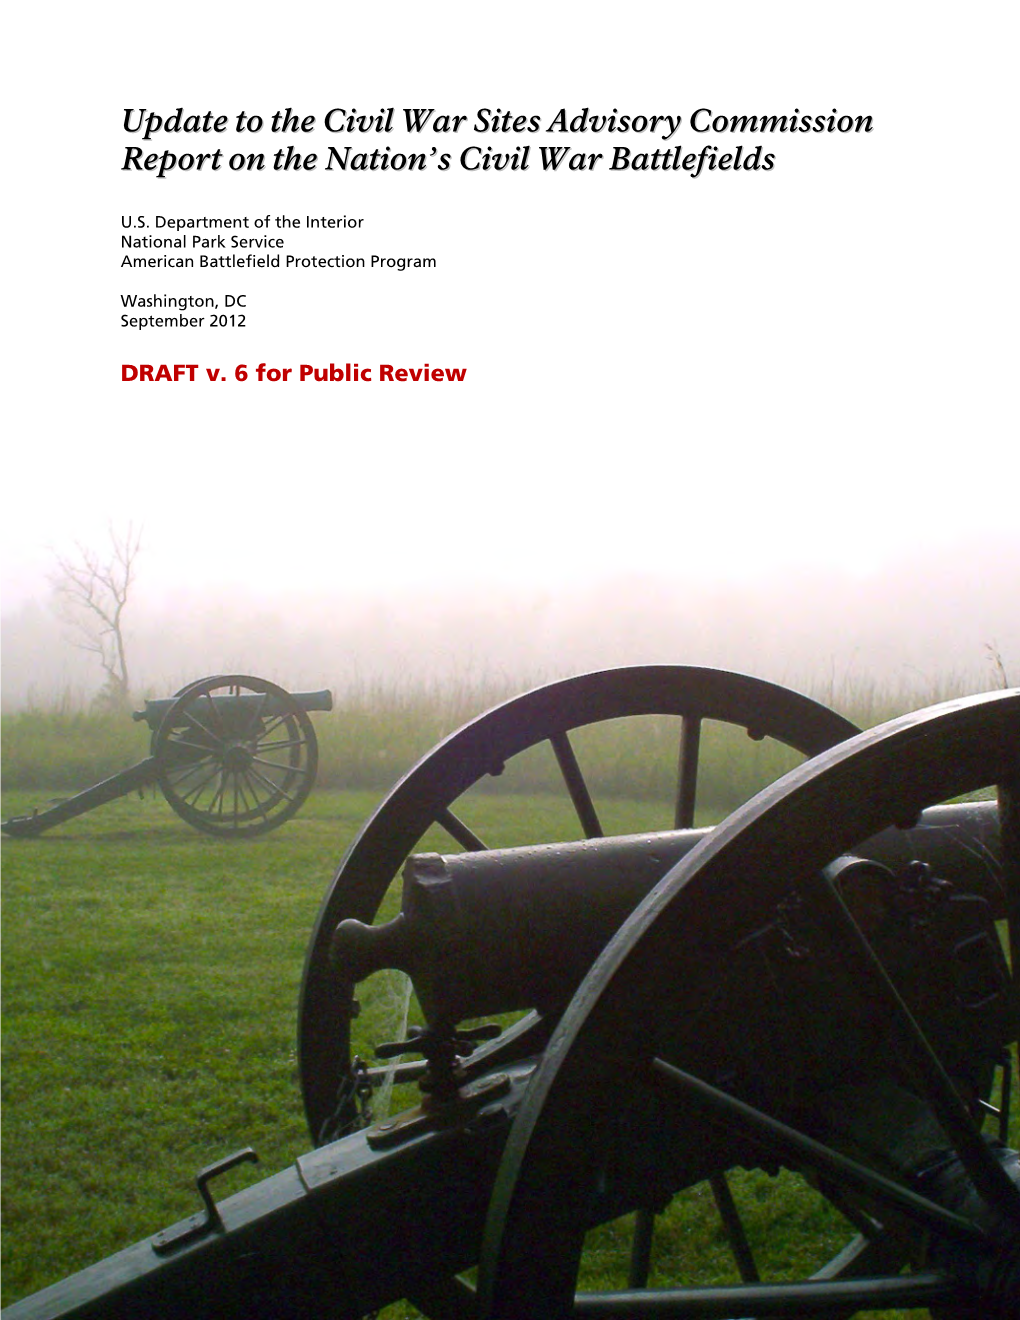 Update to the Civil War Sites Advisory Commission's Report on The